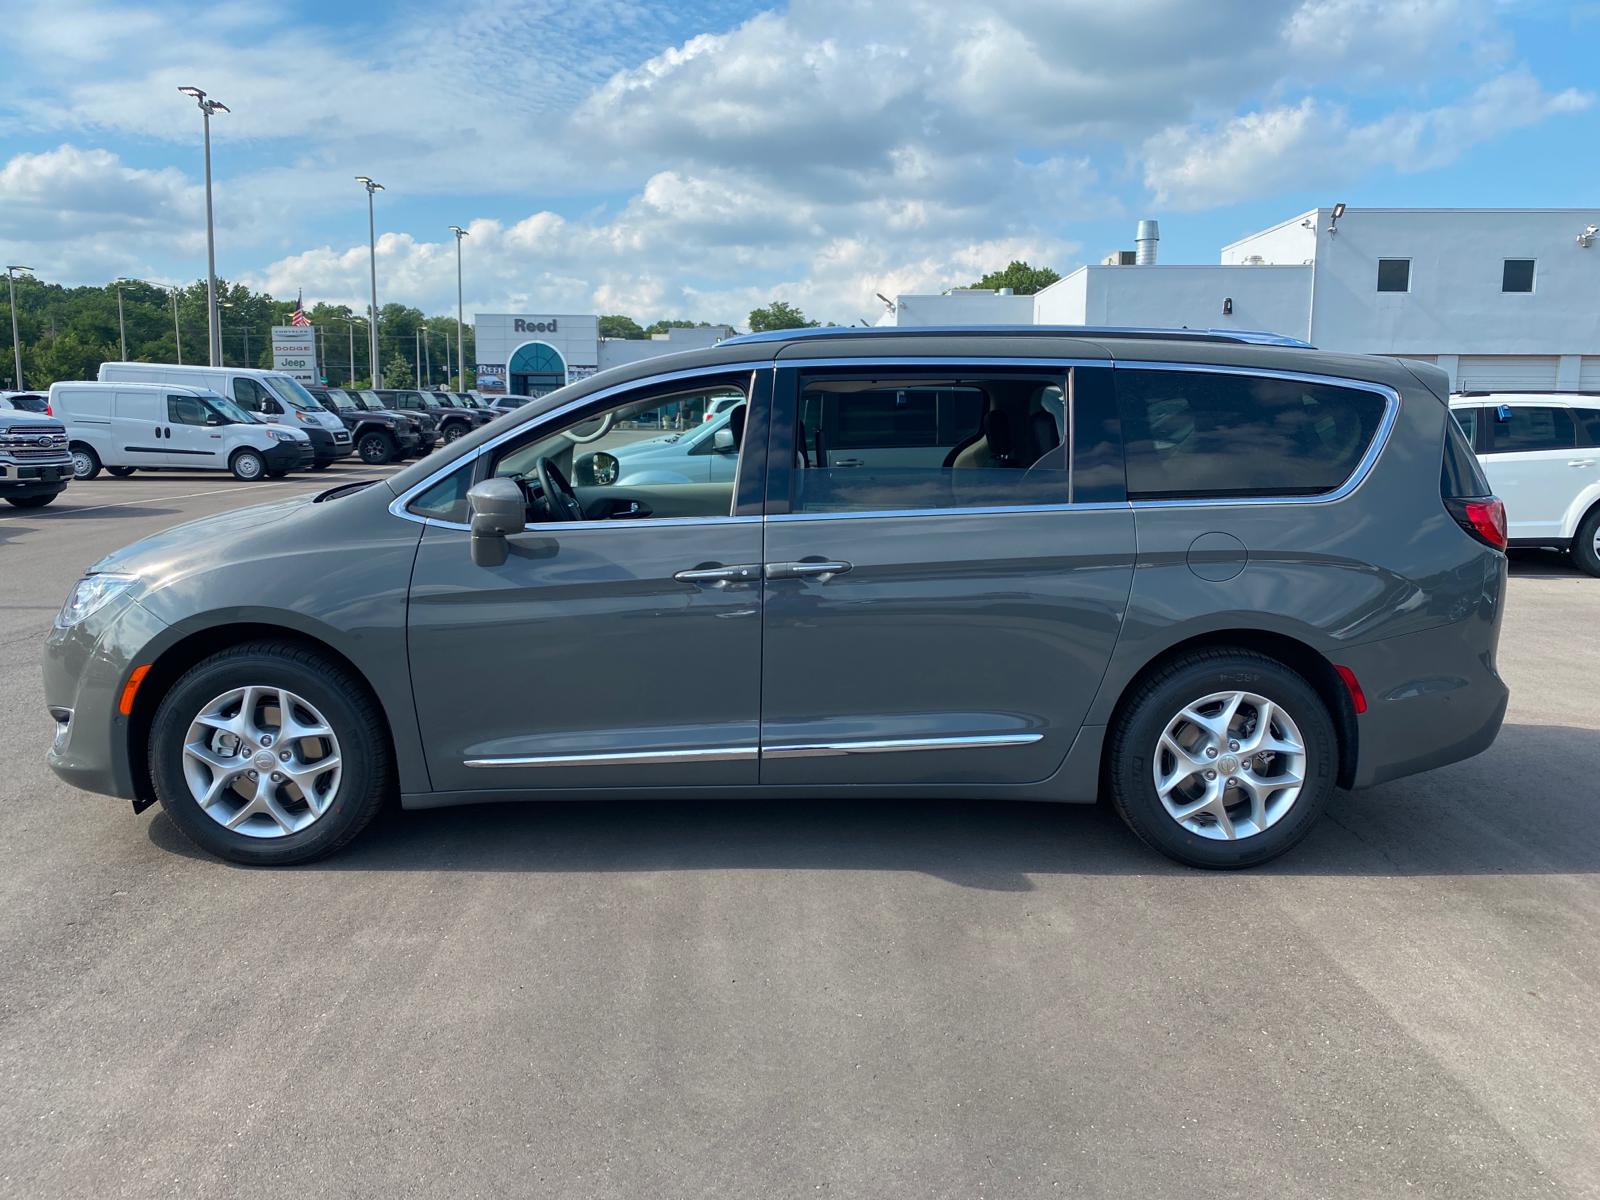 New 2020 CHRYSLER Pacifica Touring L Plus FWD Passenger Van in Overland